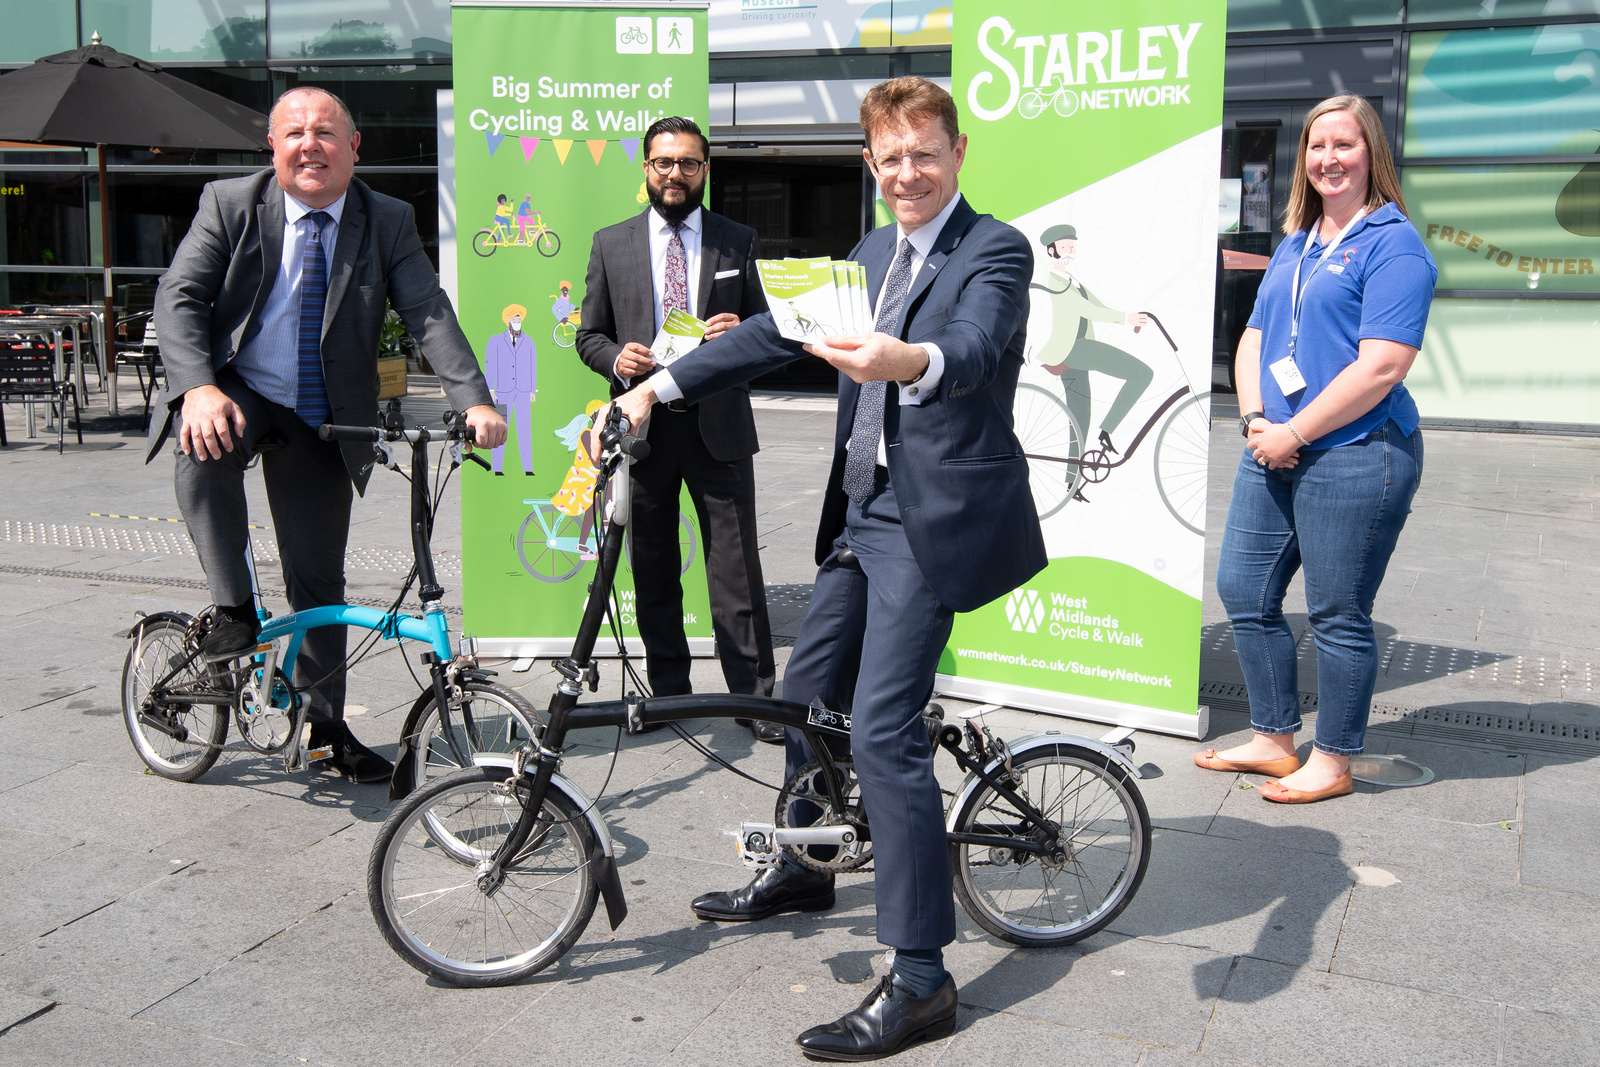 New West Midlands cycling network unveiled